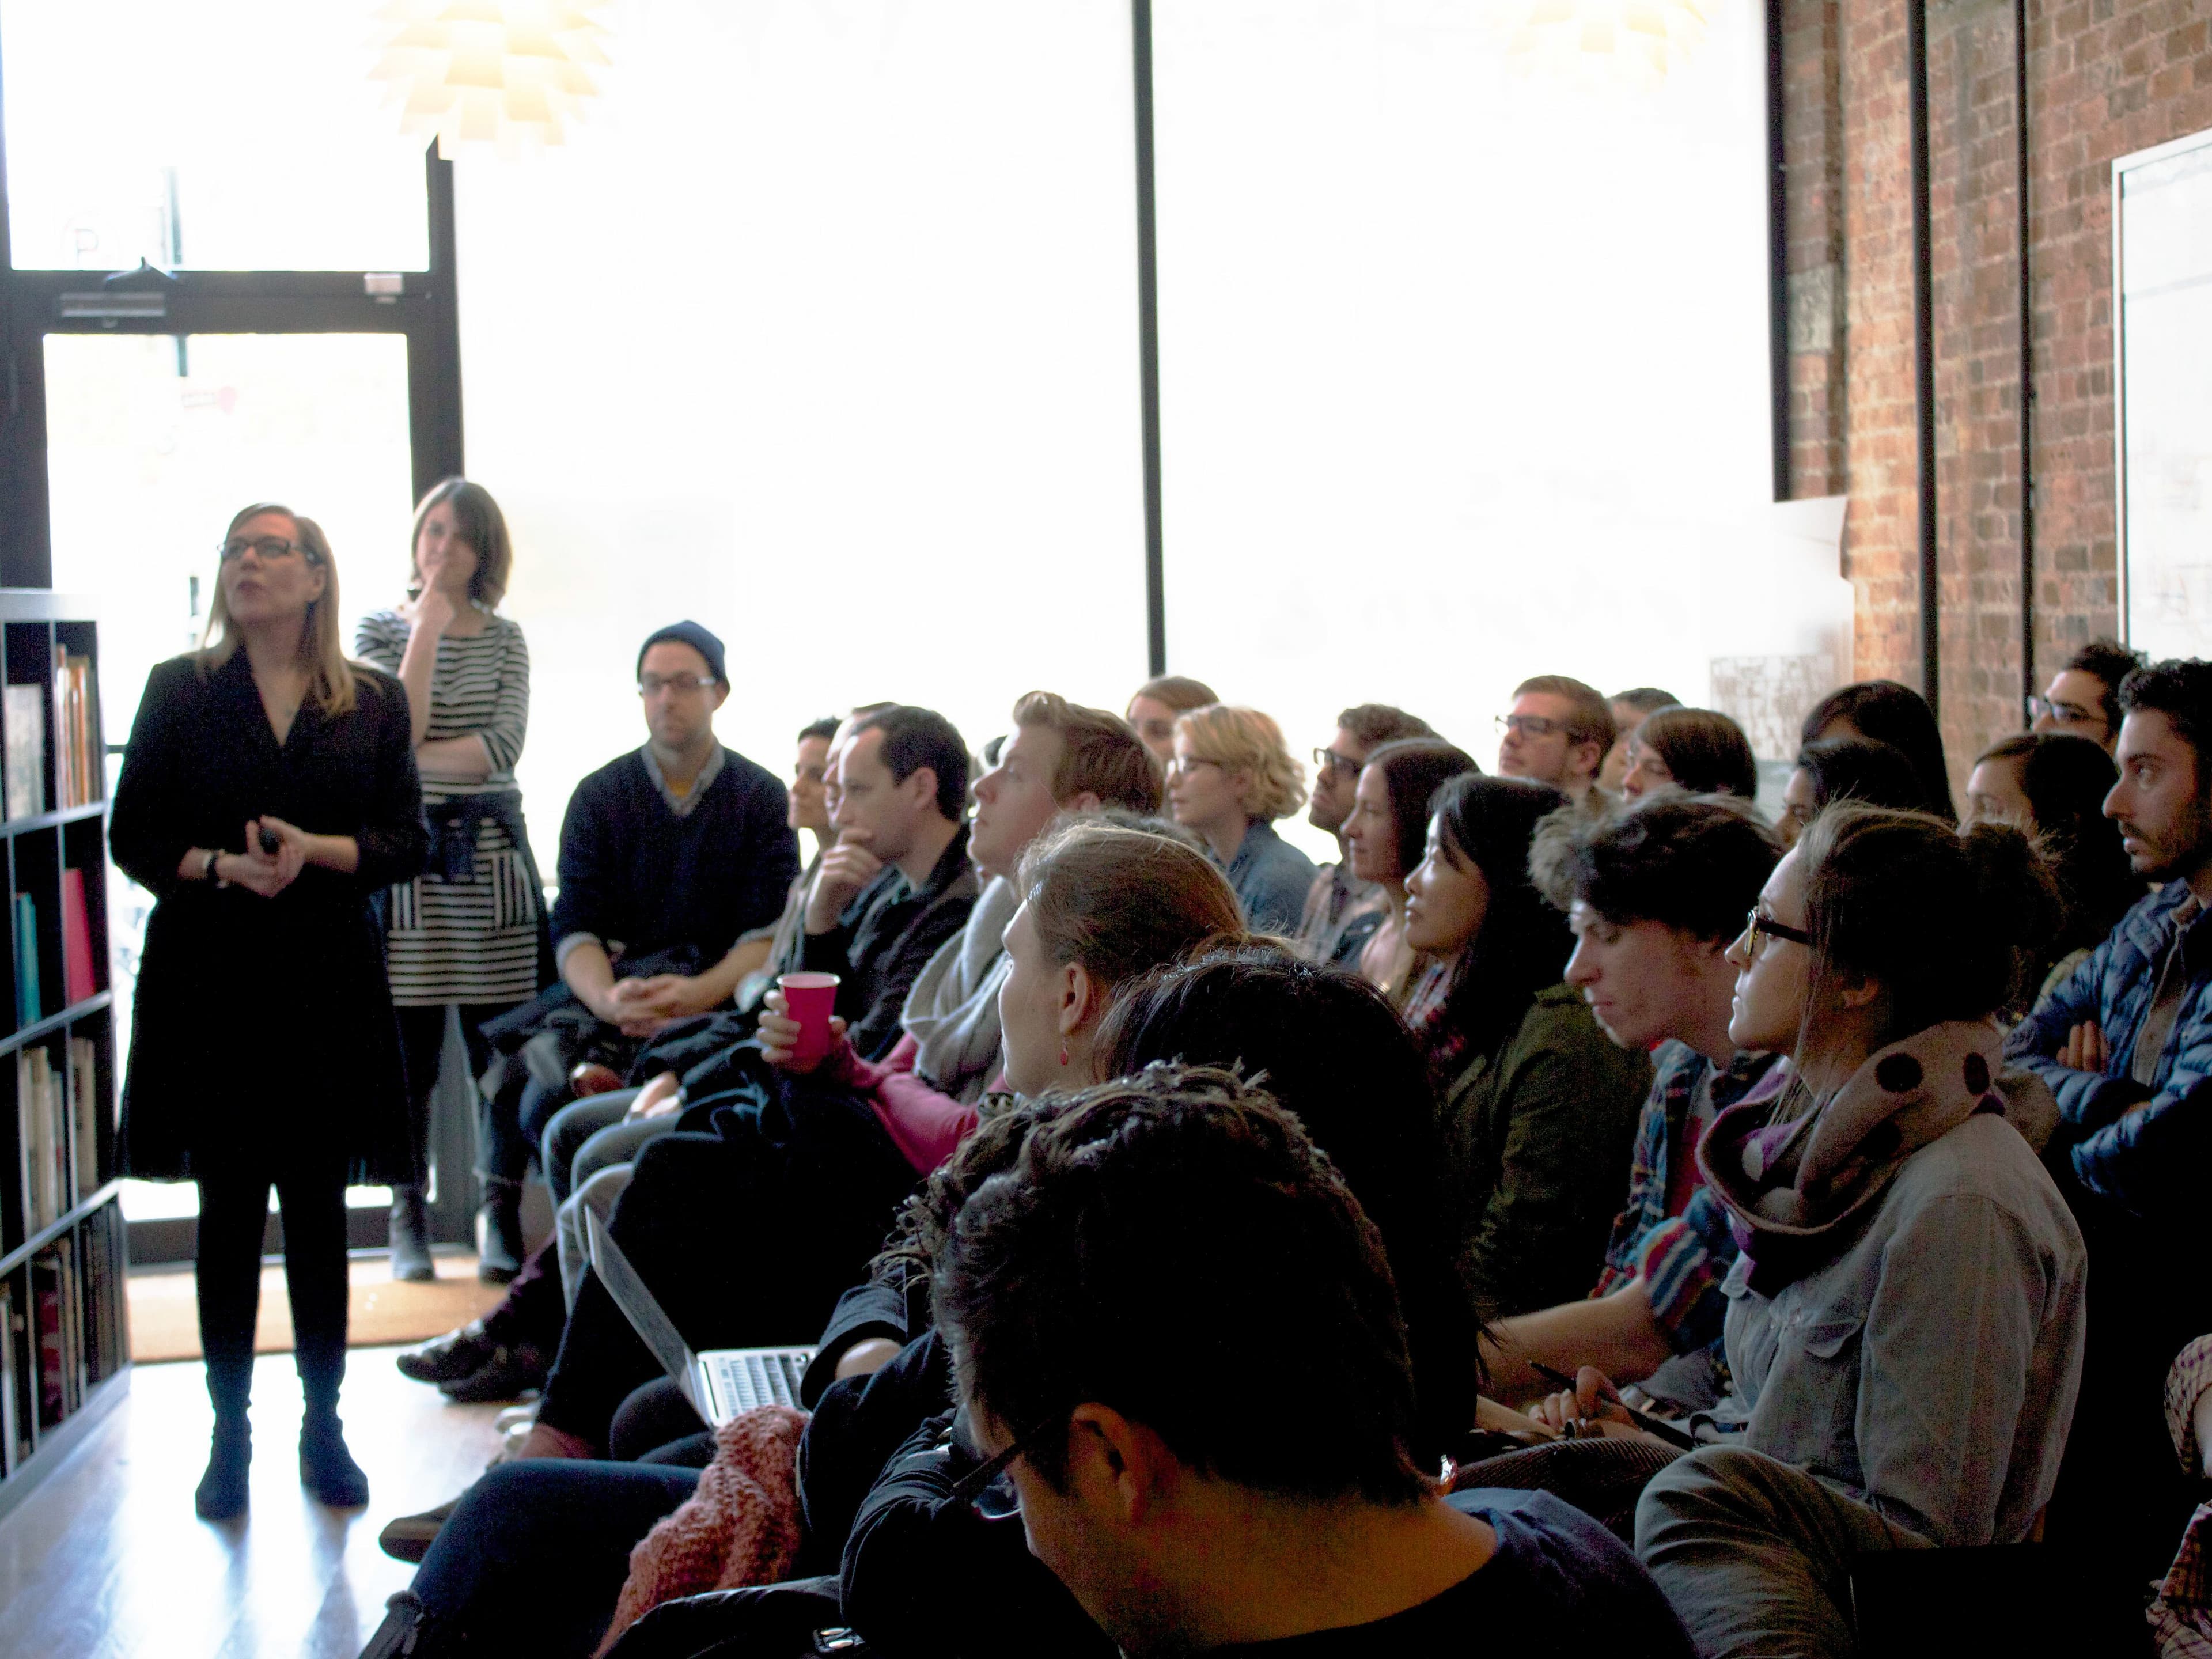 A speaker stands at the front of a room filled with attentive people sitting and listening. The room has large windows letting in natural light, and shelves with books are visible on the left. The audience is diverse, with some people taking notes and others looking engaged.